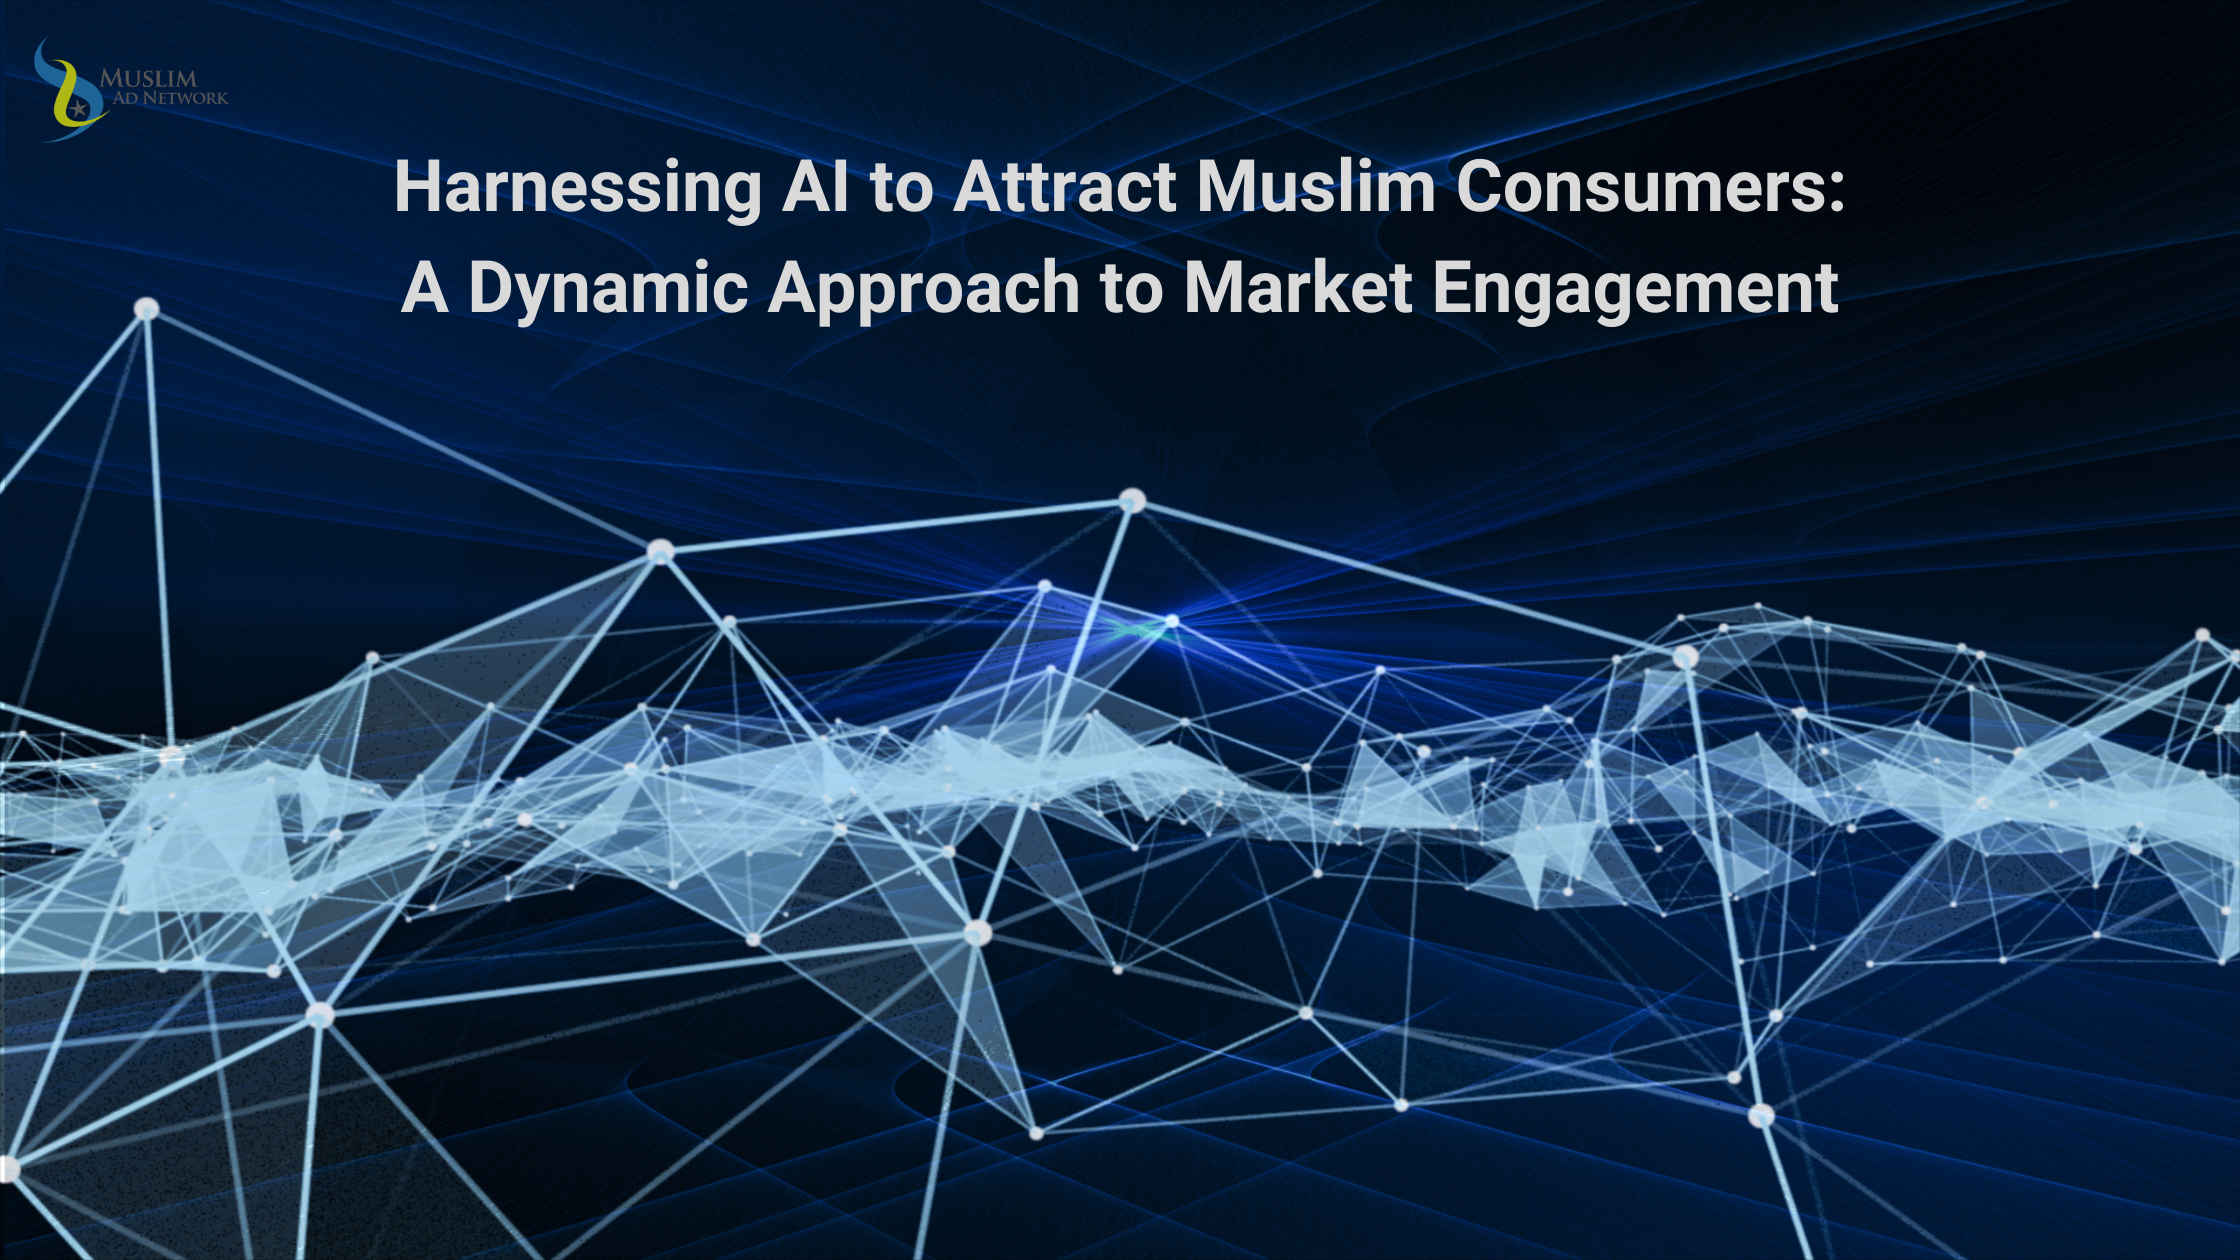 Harnessing AI to Attract Muslim Consumers: A Dynamic Approach to Market Engagement